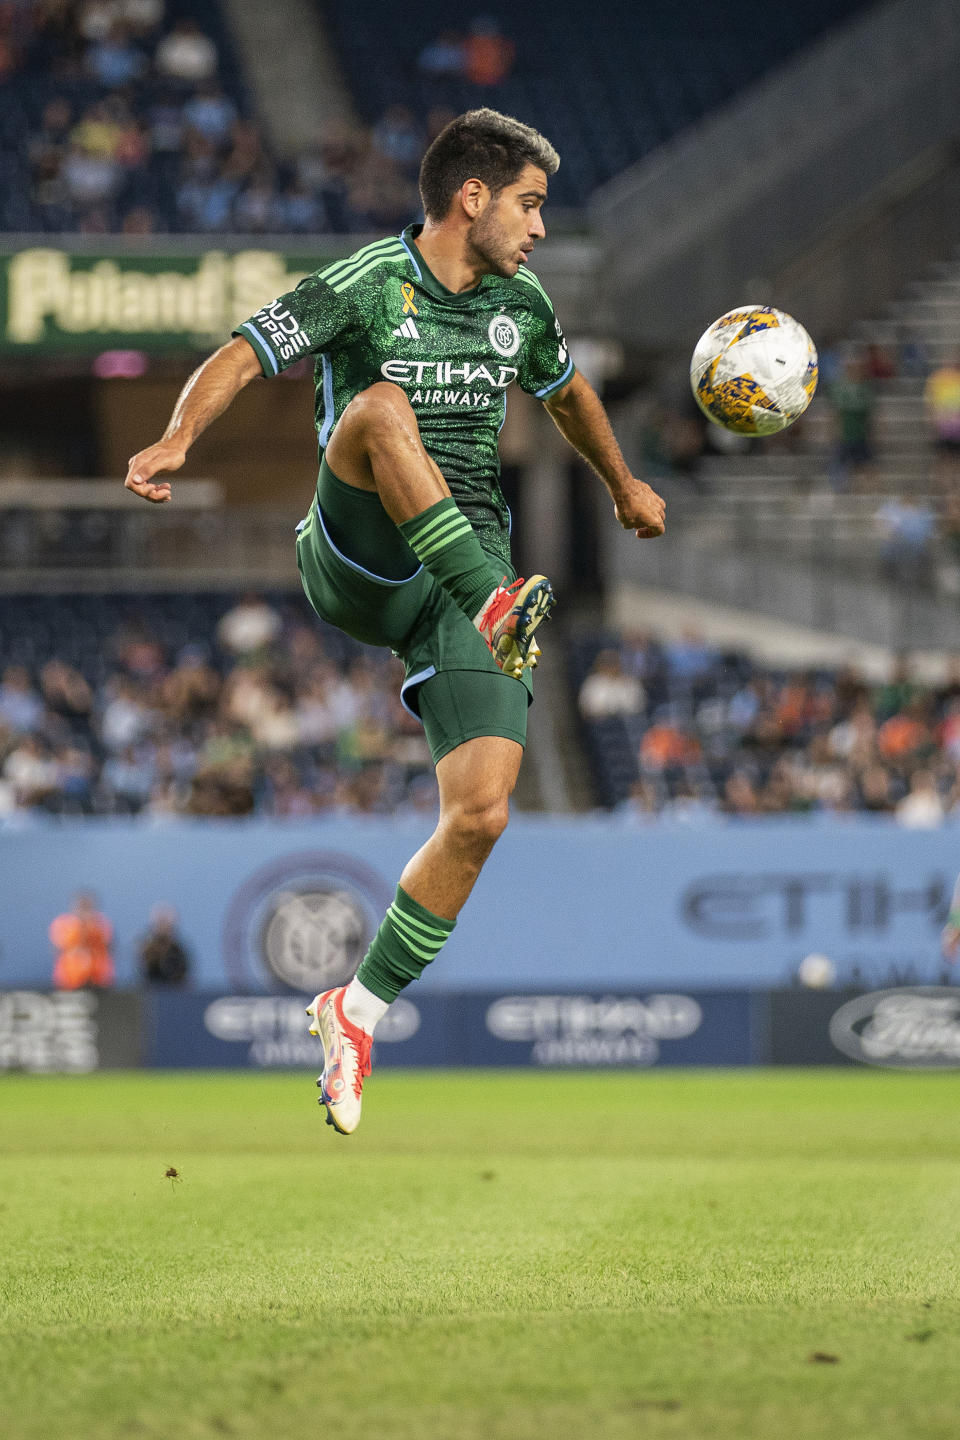 New York City FC midfielder Andres Jasson jumps to control the ball during the first half of the team's MLS soccer match against CF Montreal at Yankee Stadium, Wednesday, Aug. 30, 2023, in New York. (AP Photo/Eduardo Munoz Alvarez)